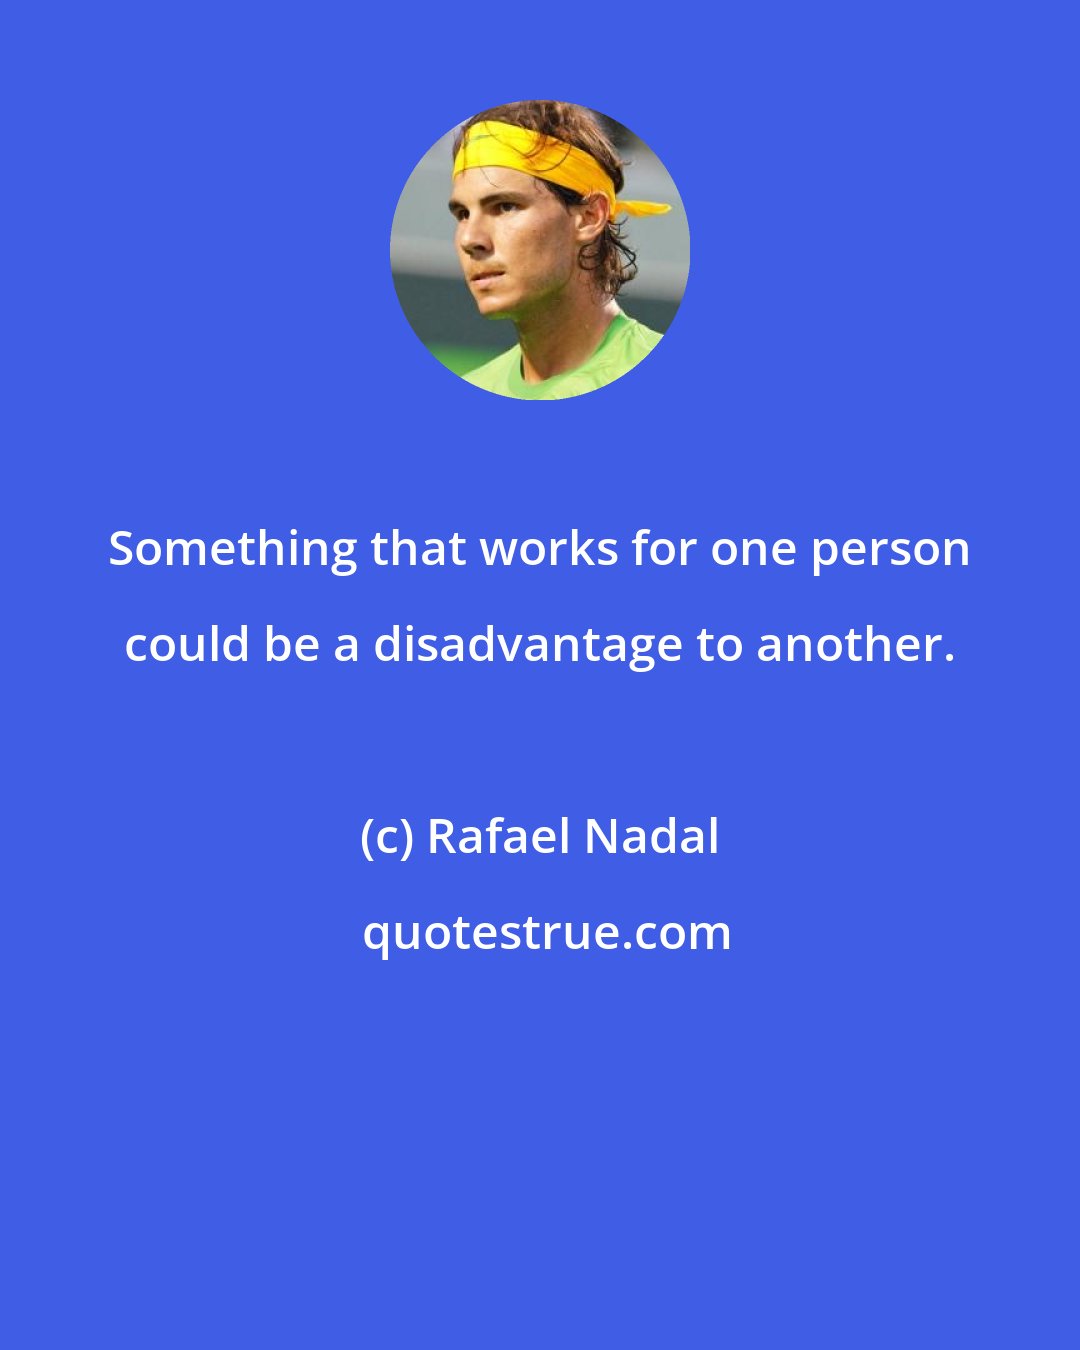 Rafael Nadal: Something that works for one person could be a disadvantage to another.